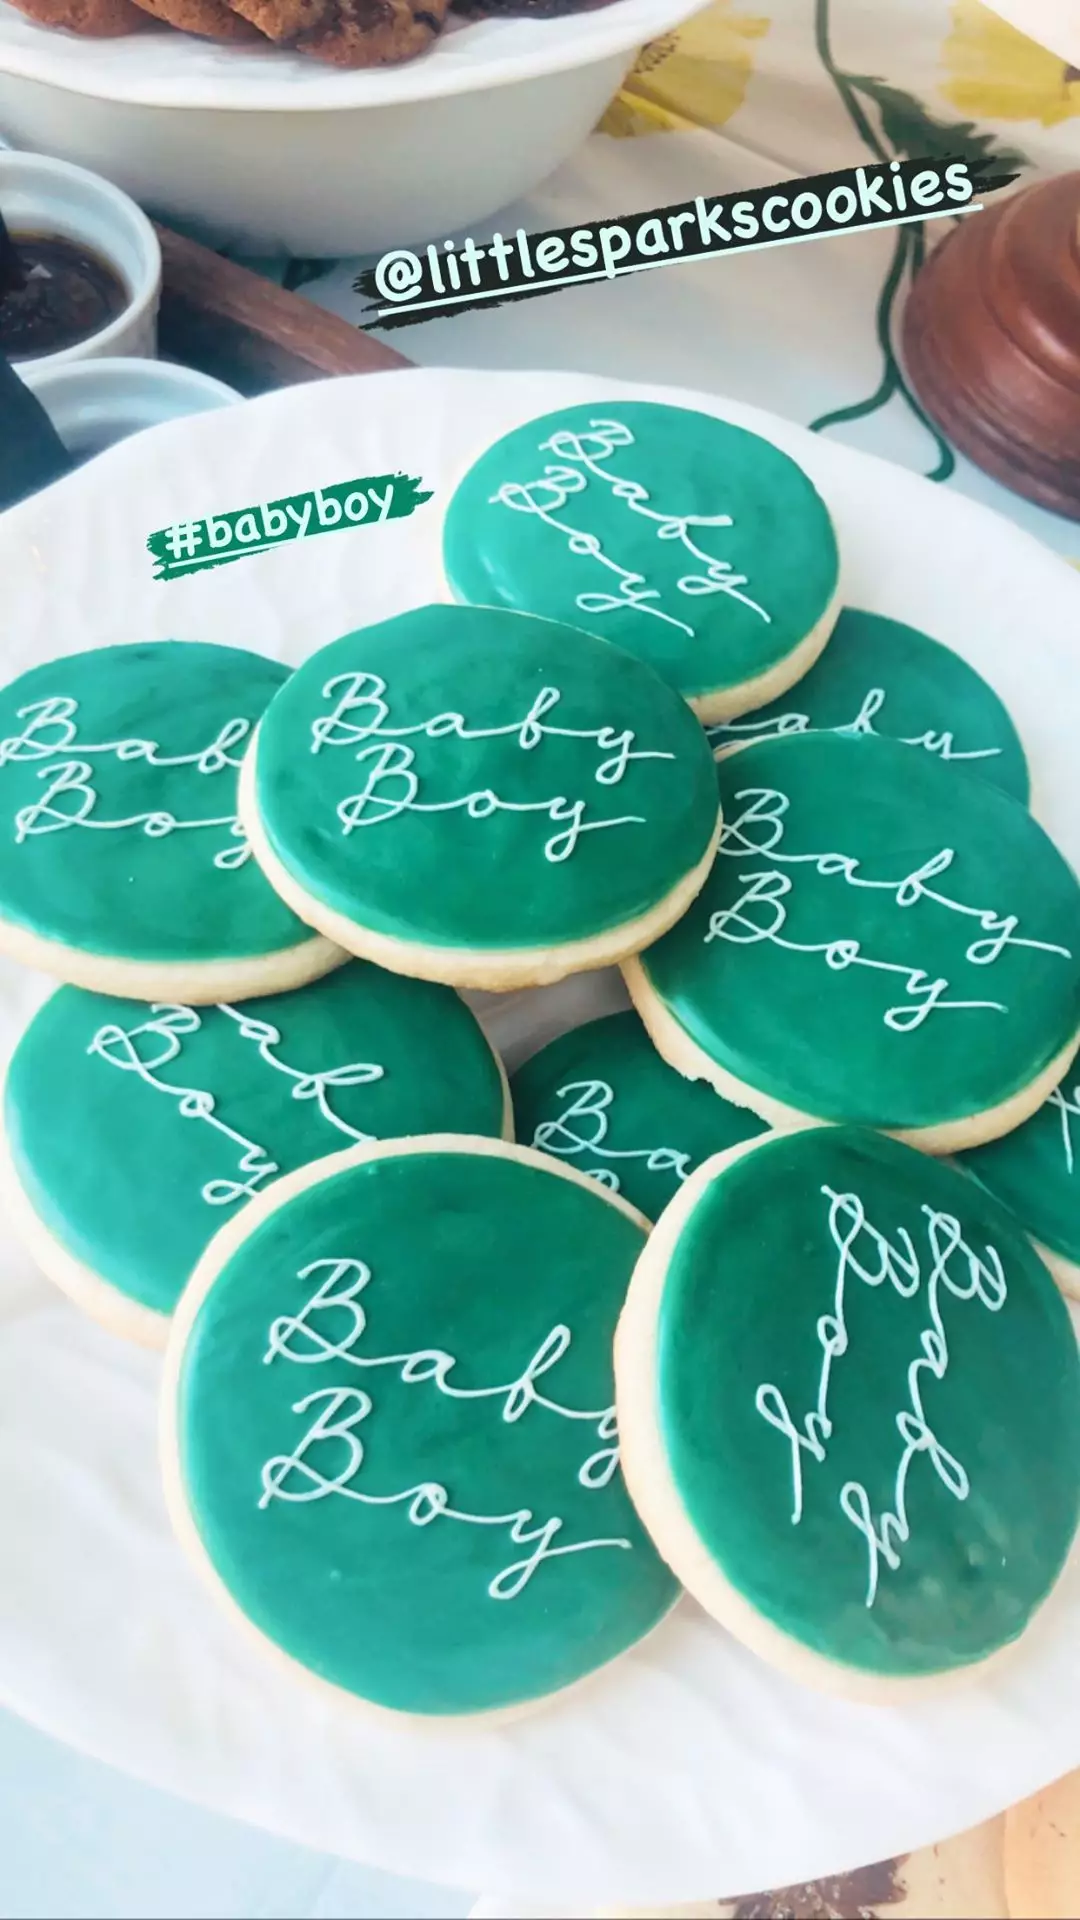 Emma was also gifted batches of cookies iced with the words 'Baby Boy' (